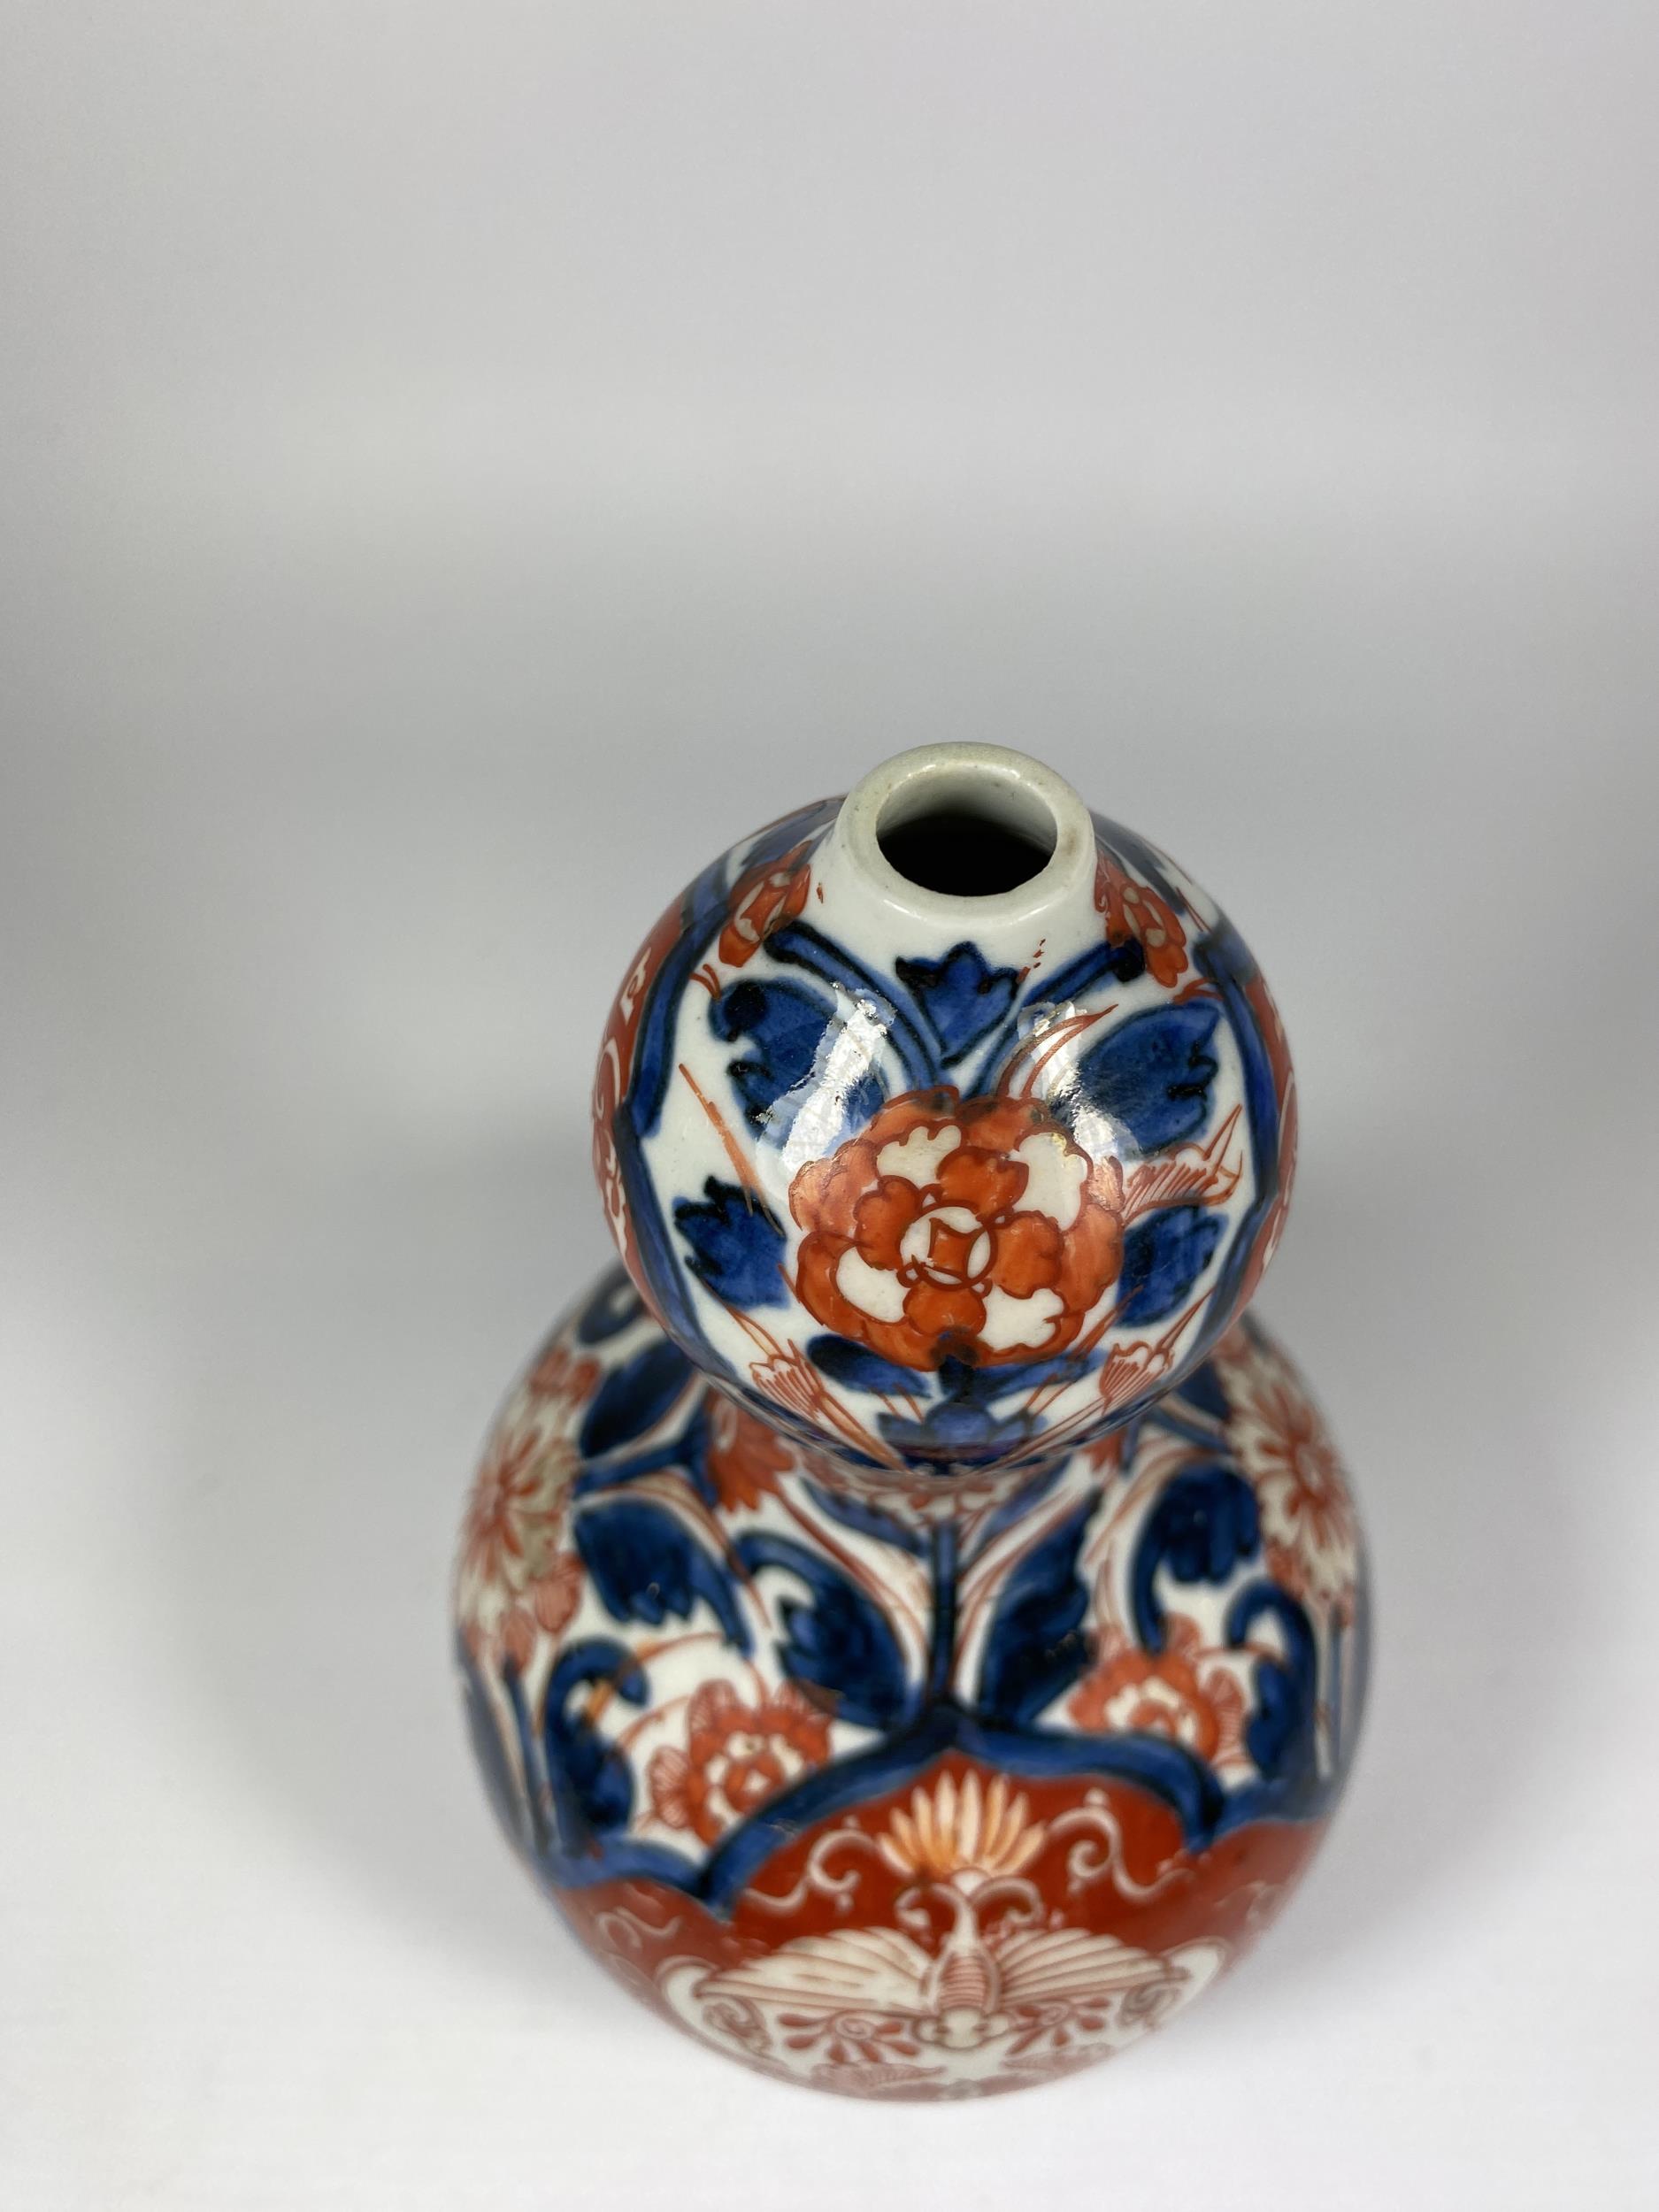 A JAPANESE IMARI MEIJI PERIOD (1868-1912) DOUBLE GOURD FORM BOTTLE VASE, HEIGHT 20CM - Image 2 of 5